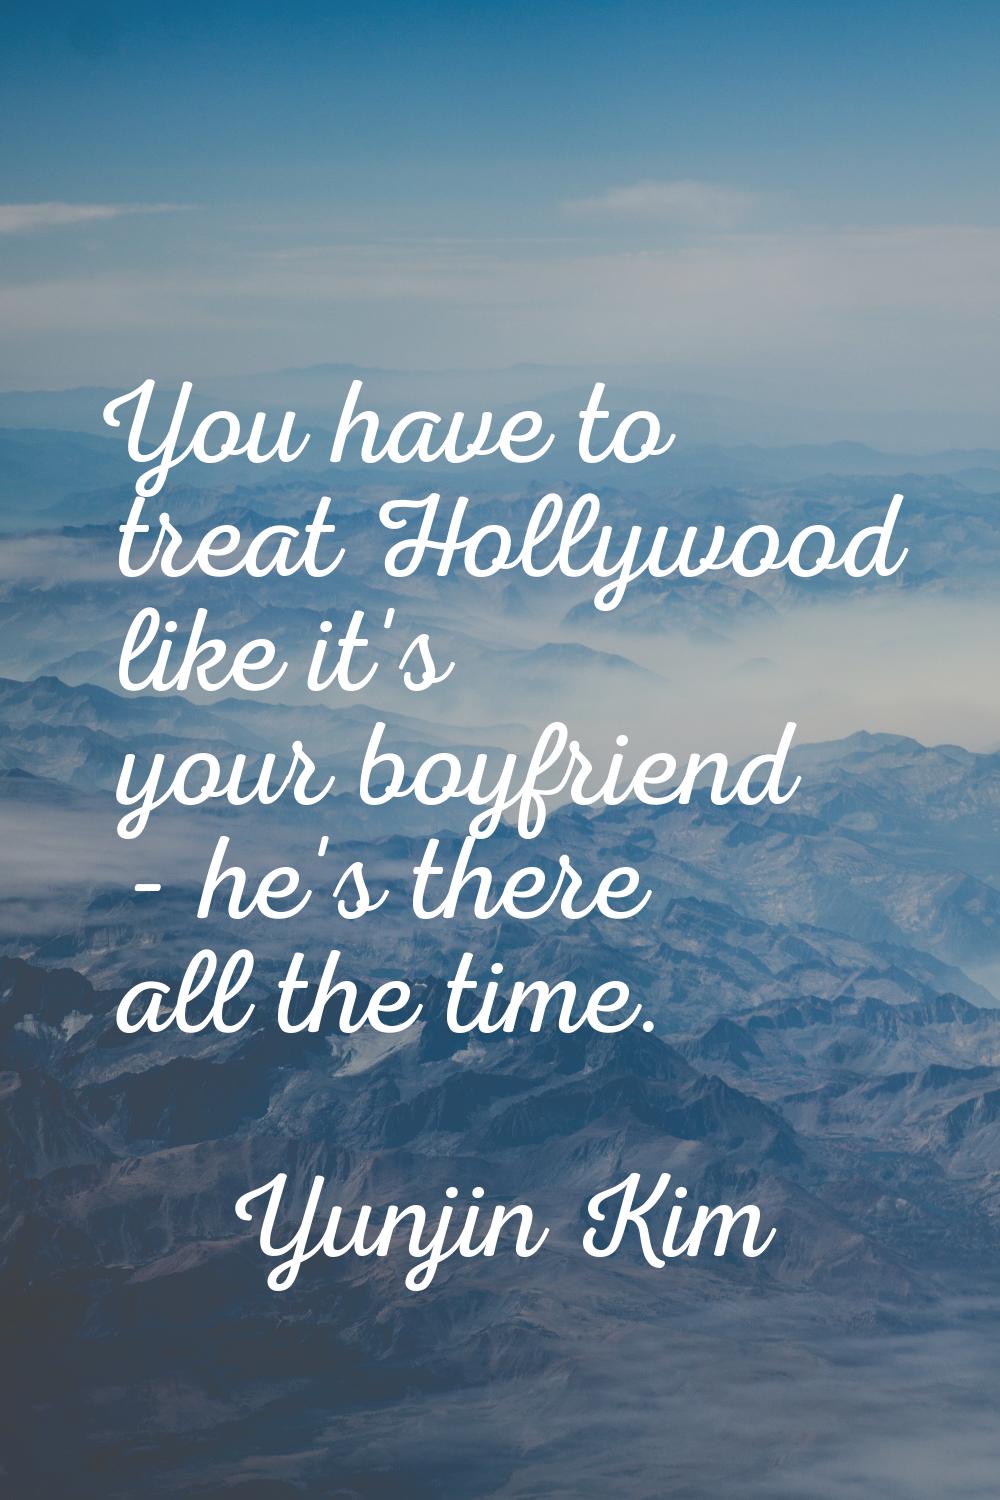 You have to treat Hollywood like it's your boyfriend - he's there all the time.